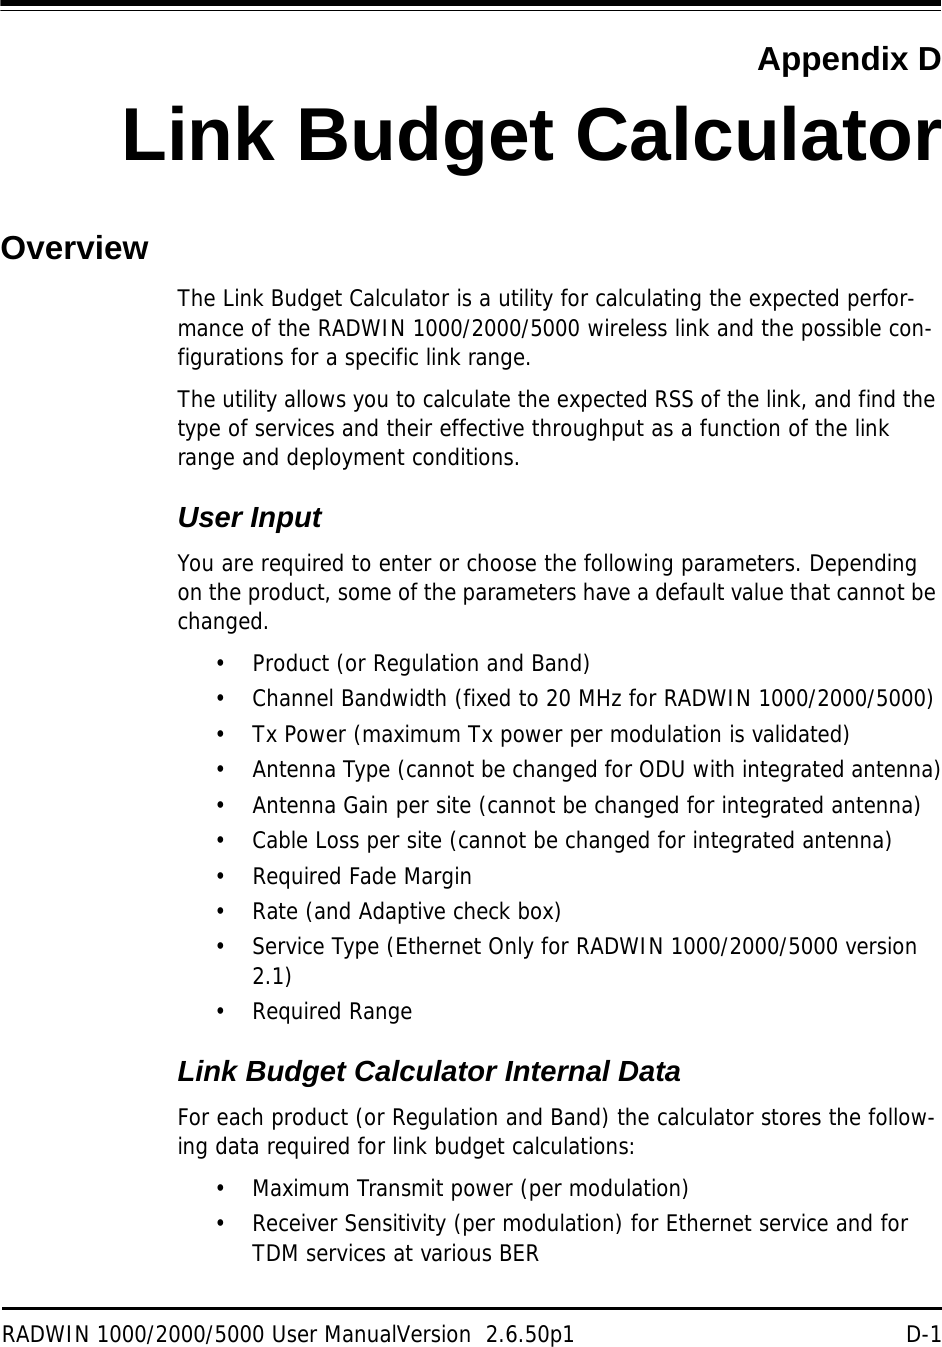 RADWIN 1000/2000/5000 User ManualVersion  2.6.50p1 D-1Appendix DLink Budget CalculatorOverviewThe Link Budget Calculator is a utility for calculating the expected perfor-mance of the RADWIN 1000/2000/5000 wireless link and the possible con-figurations for a specific link range.The utility allows you to calculate the expected RSS of the link, and find the type of services and their effective throughput as a function of the link range and deployment conditions.User InputYou are required to enter or choose the following parameters. Depending on the product, some of the parameters have a default value that cannot be changed. • Product (or Regulation and Band)• Channel Bandwidth (fixed to 20 MHz for RADWIN 1000/2000/5000)• Tx Power (maximum Tx power per modulation is validated)• Antenna Type (cannot be changed for ODU with integrated antenna)• Antenna Gain per site (cannot be changed for integrated antenna)• Cable Loss per site (cannot be changed for integrated antenna)• Required Fade Margin• Rate (and Adaptive check box)• Service Type (Ethernet Only for RADWIN 1000/2000/5000 version 2.1)• Required RangeLink Budget Calculator Internal DataFor each product (or Regulation and Band) the calculator stores the follow-ing data required for link budget calculations:• Maximum Transmit power (per modulation)• Receiver Sensitivity (per modulation) for Ethernet service and for TDM services at various BER